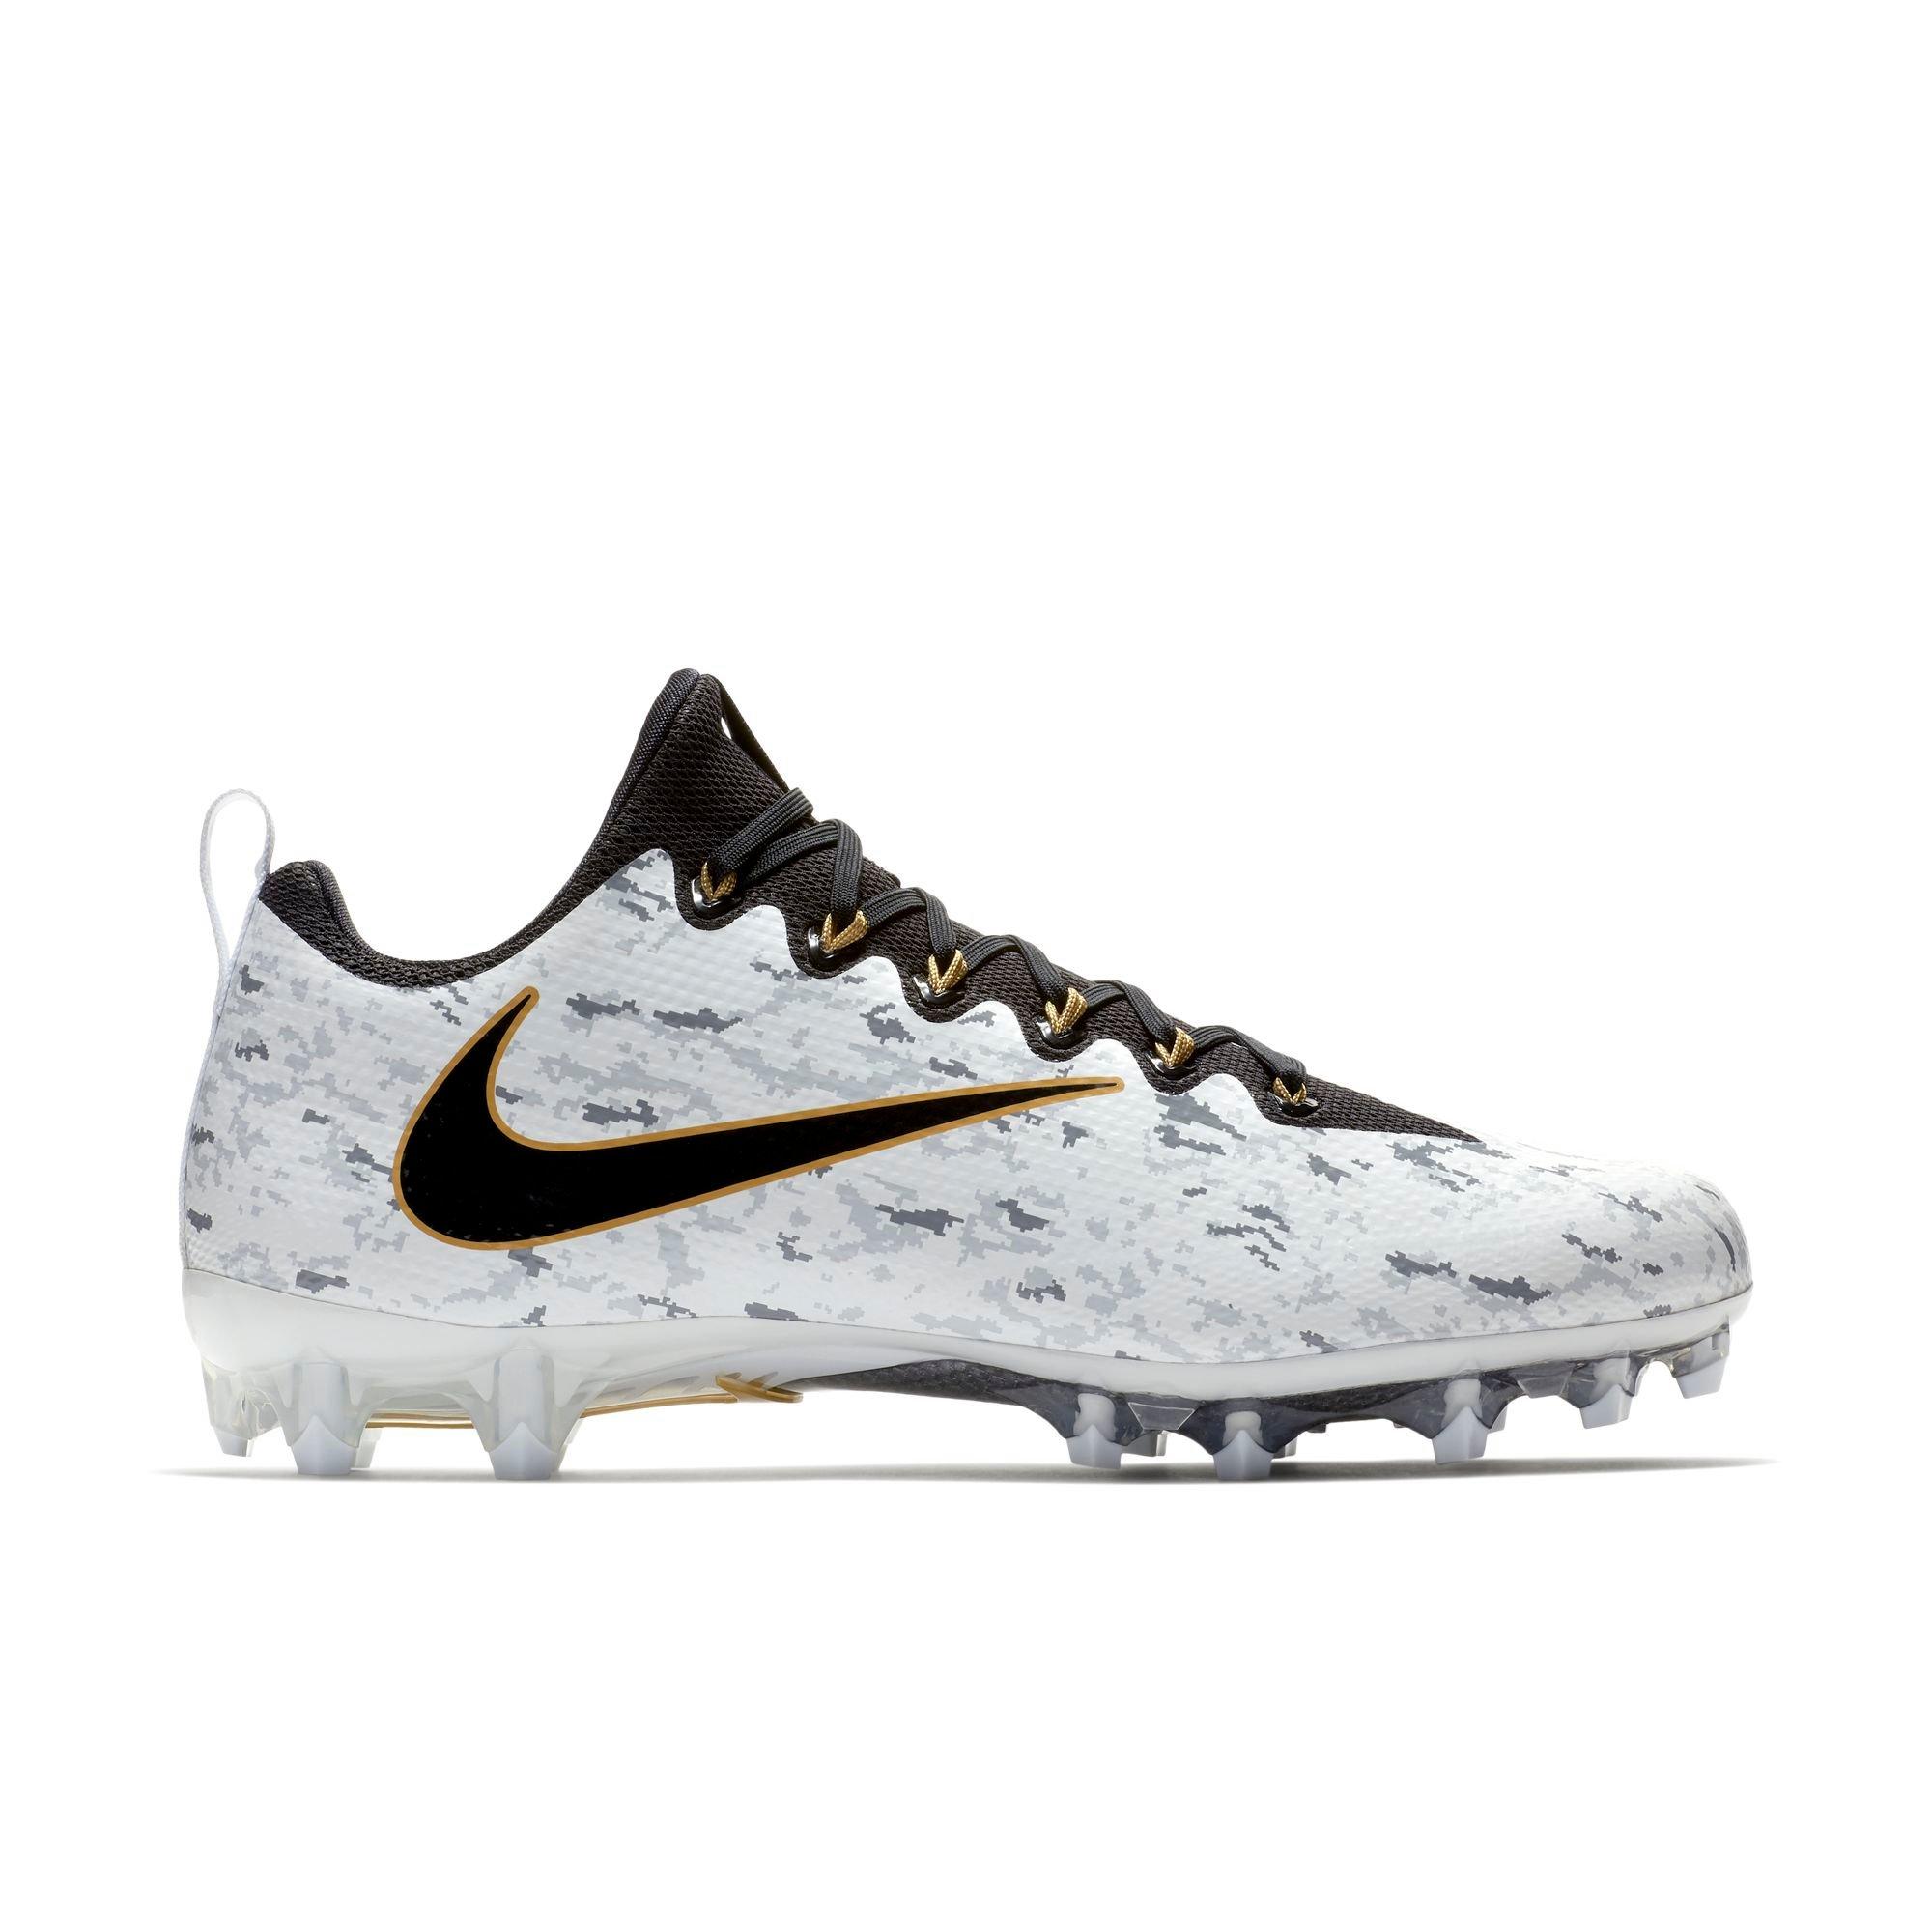 white and gold vapor cleats